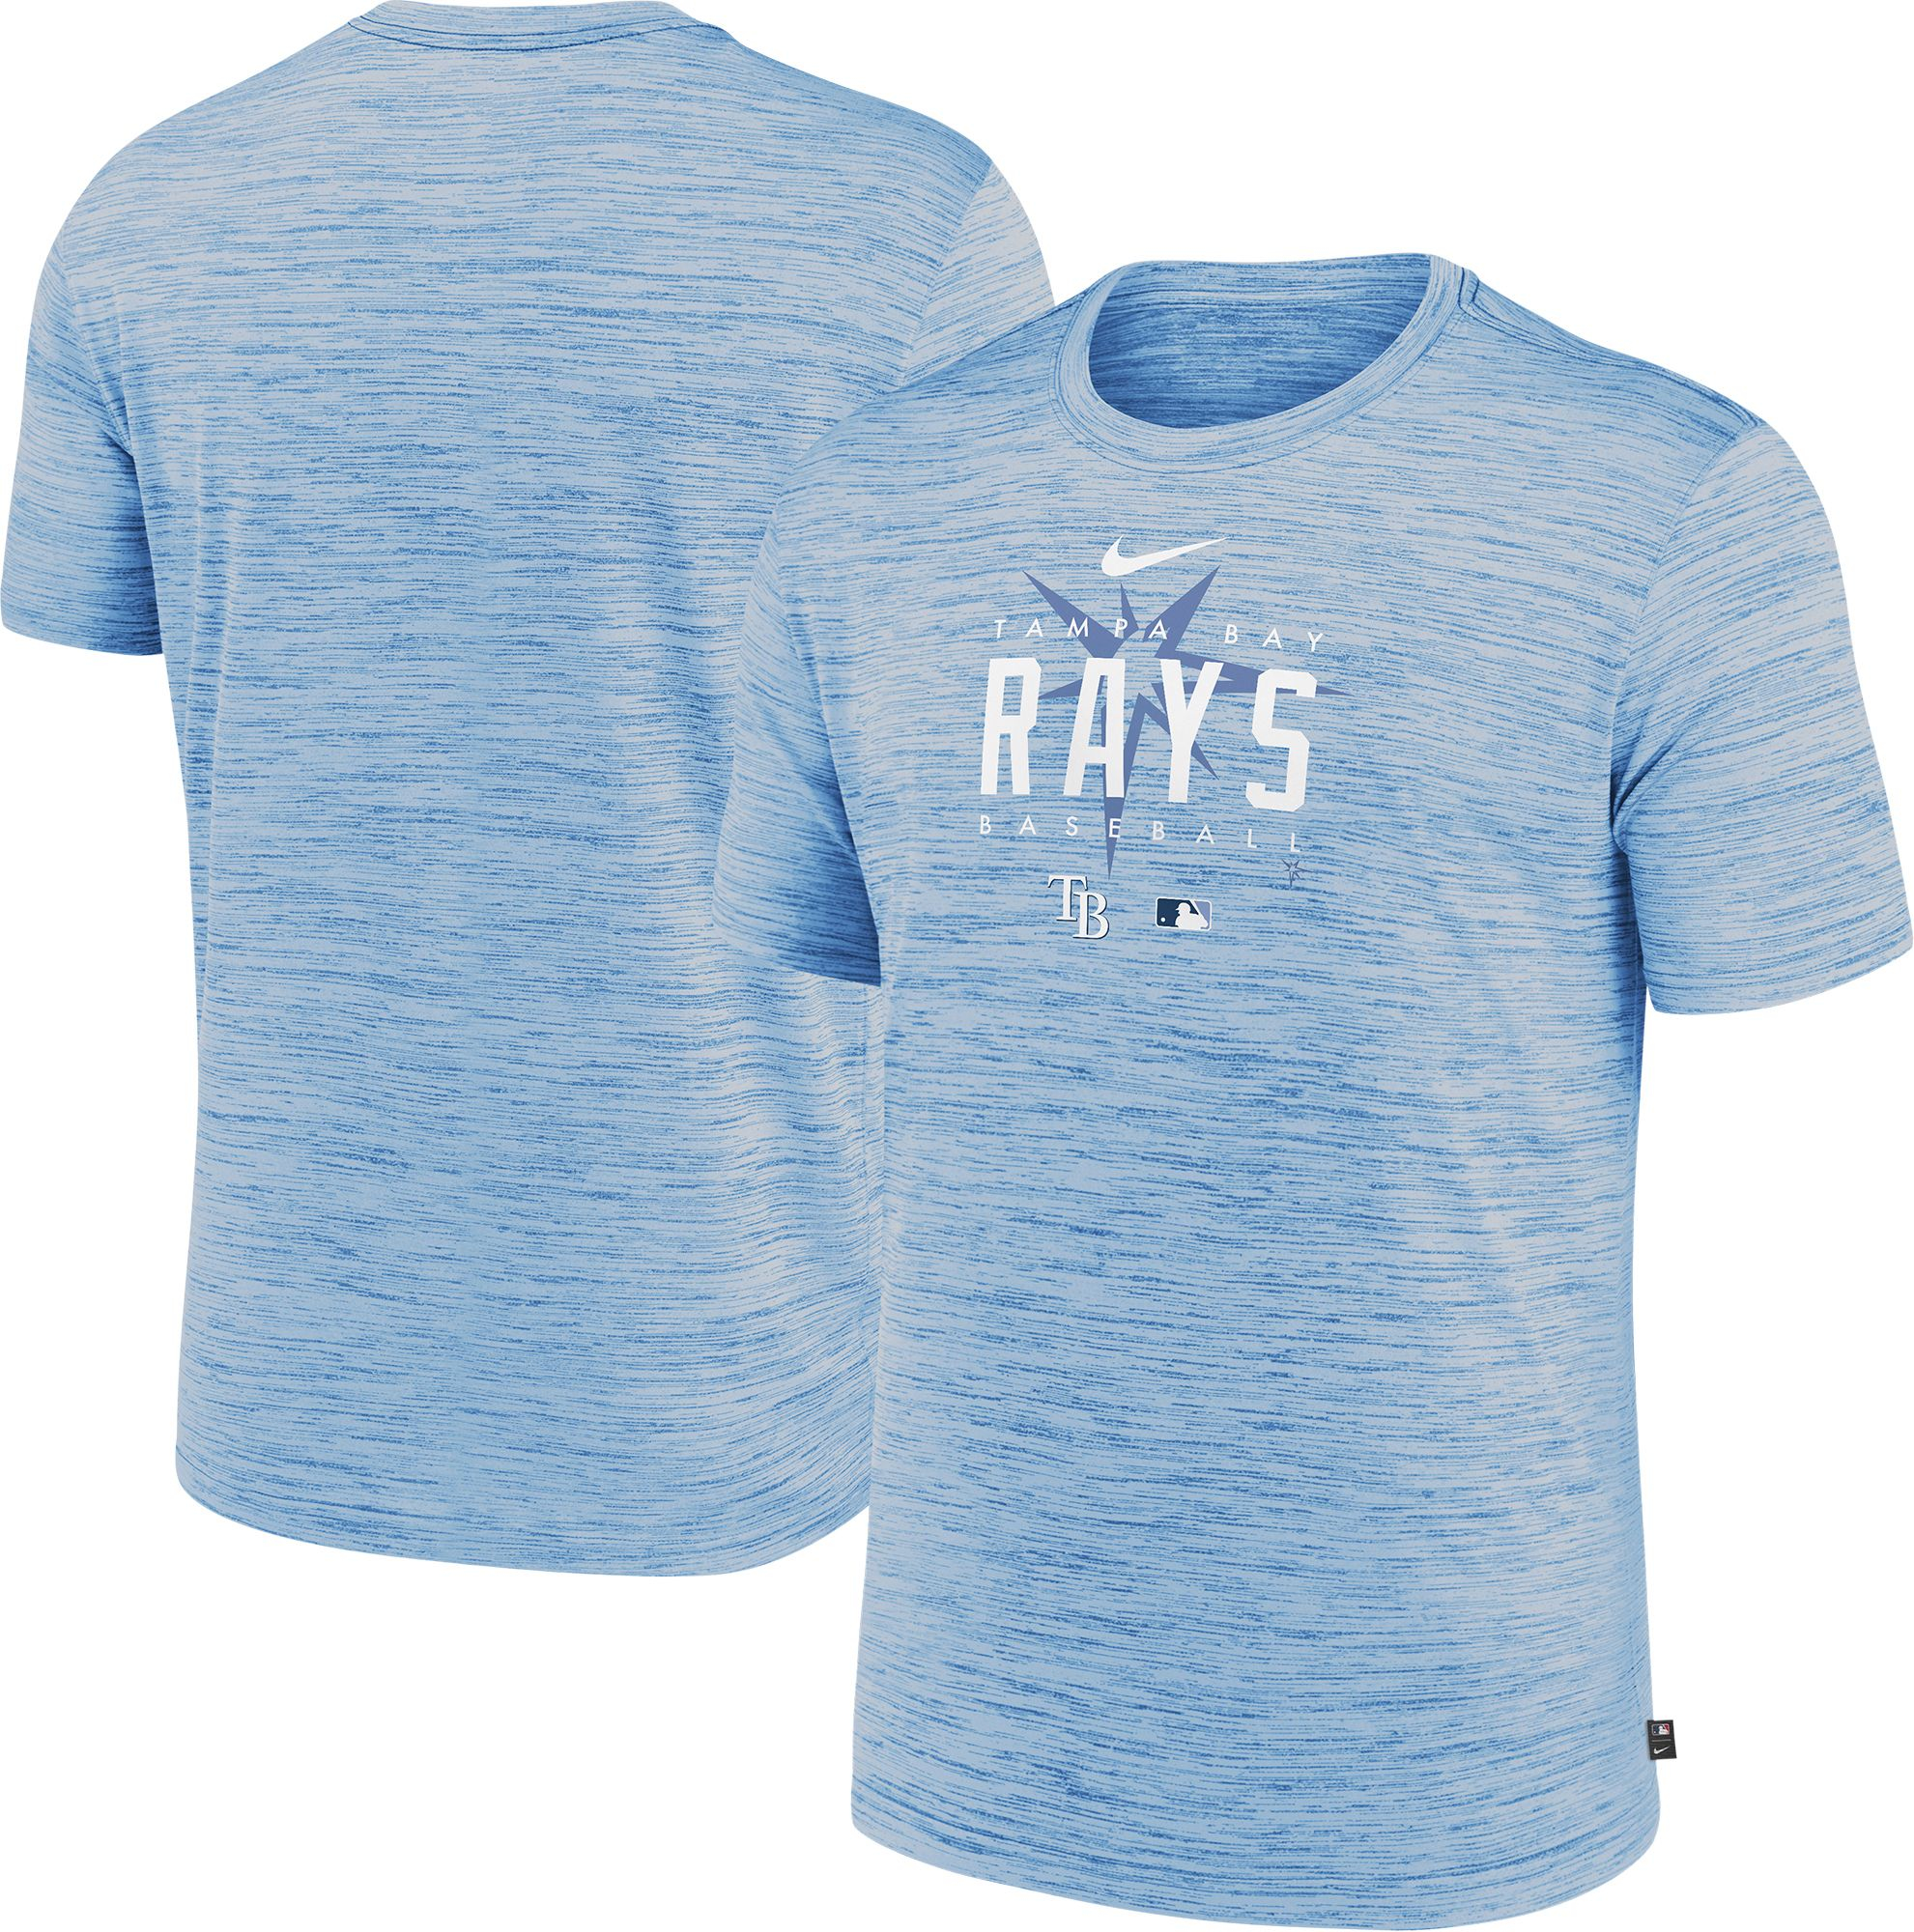 Nike Men's Tampa Bay Rays Blue Authentic Collection Velocity T-Shirt, XXL